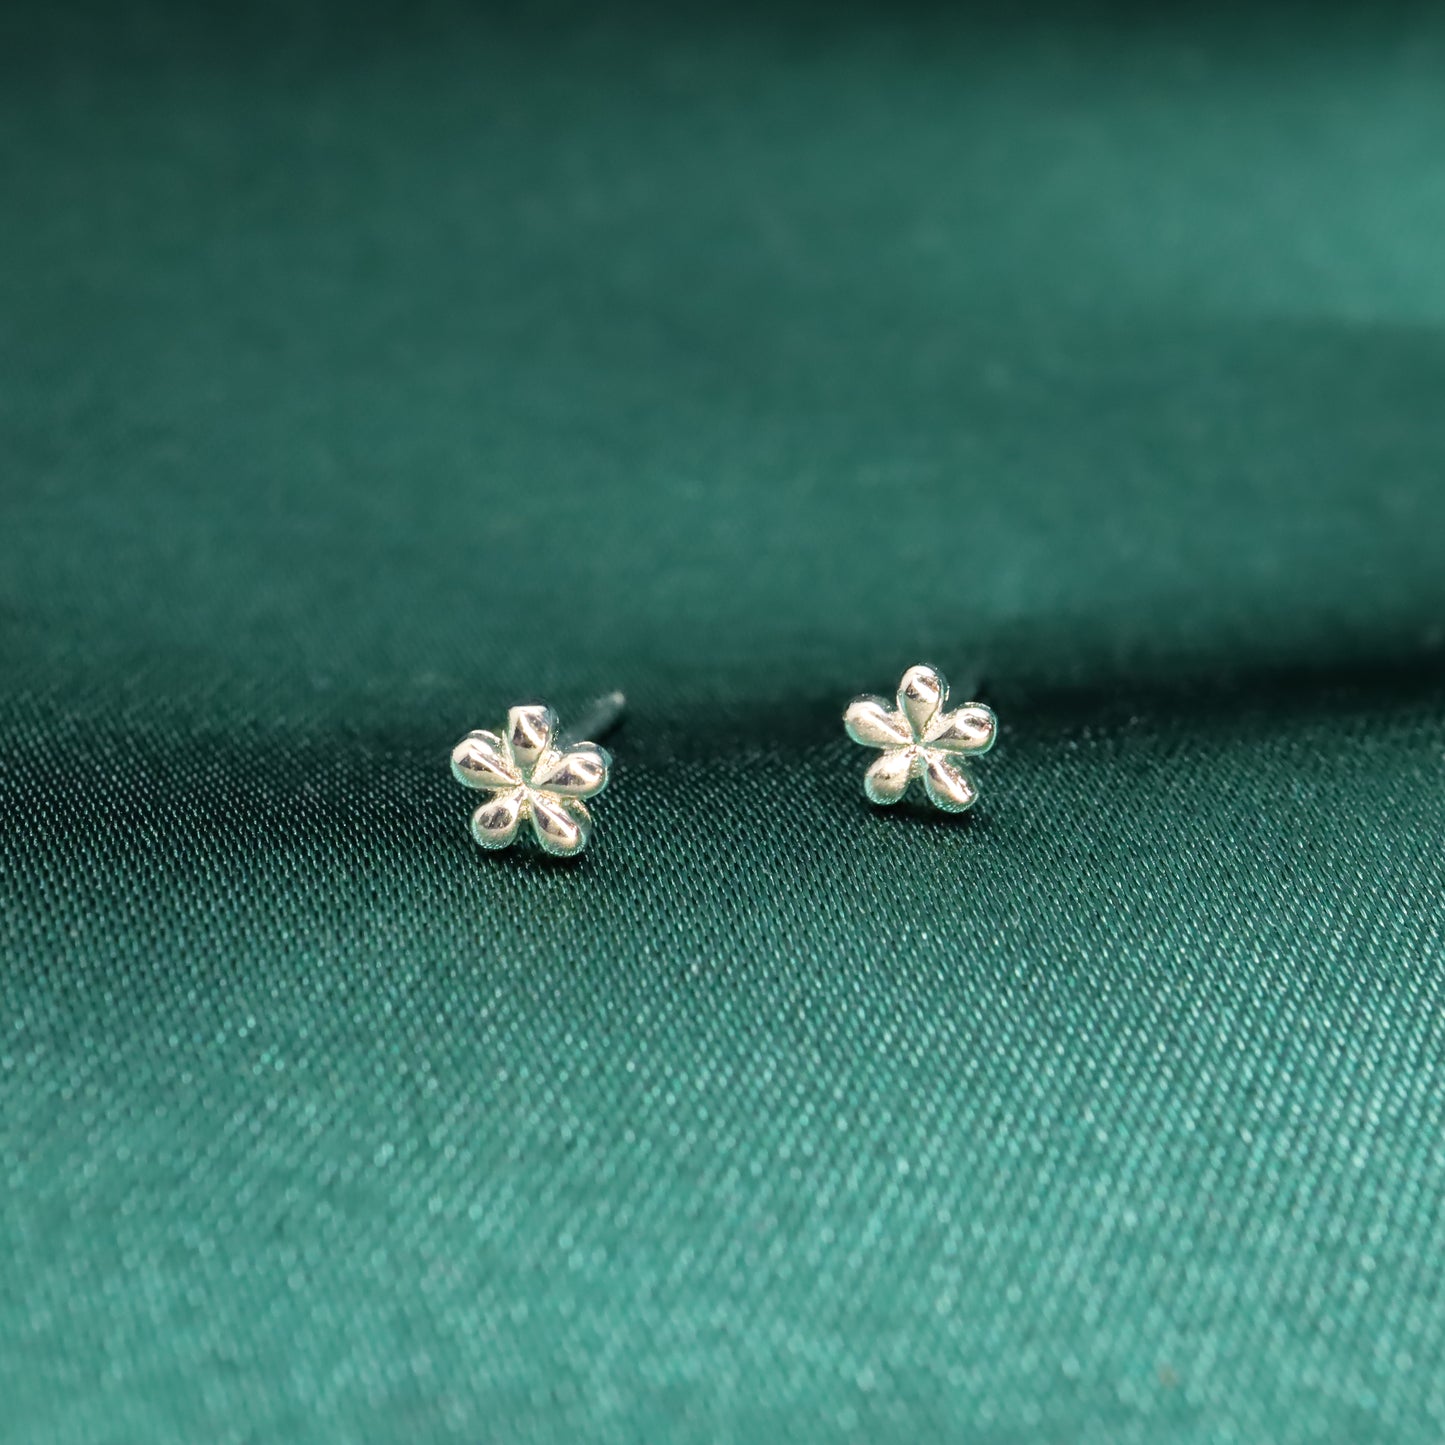 Mini Flower - S925 Sterling Silver Stud Earrings (Silver & Gold 2 Pairs)